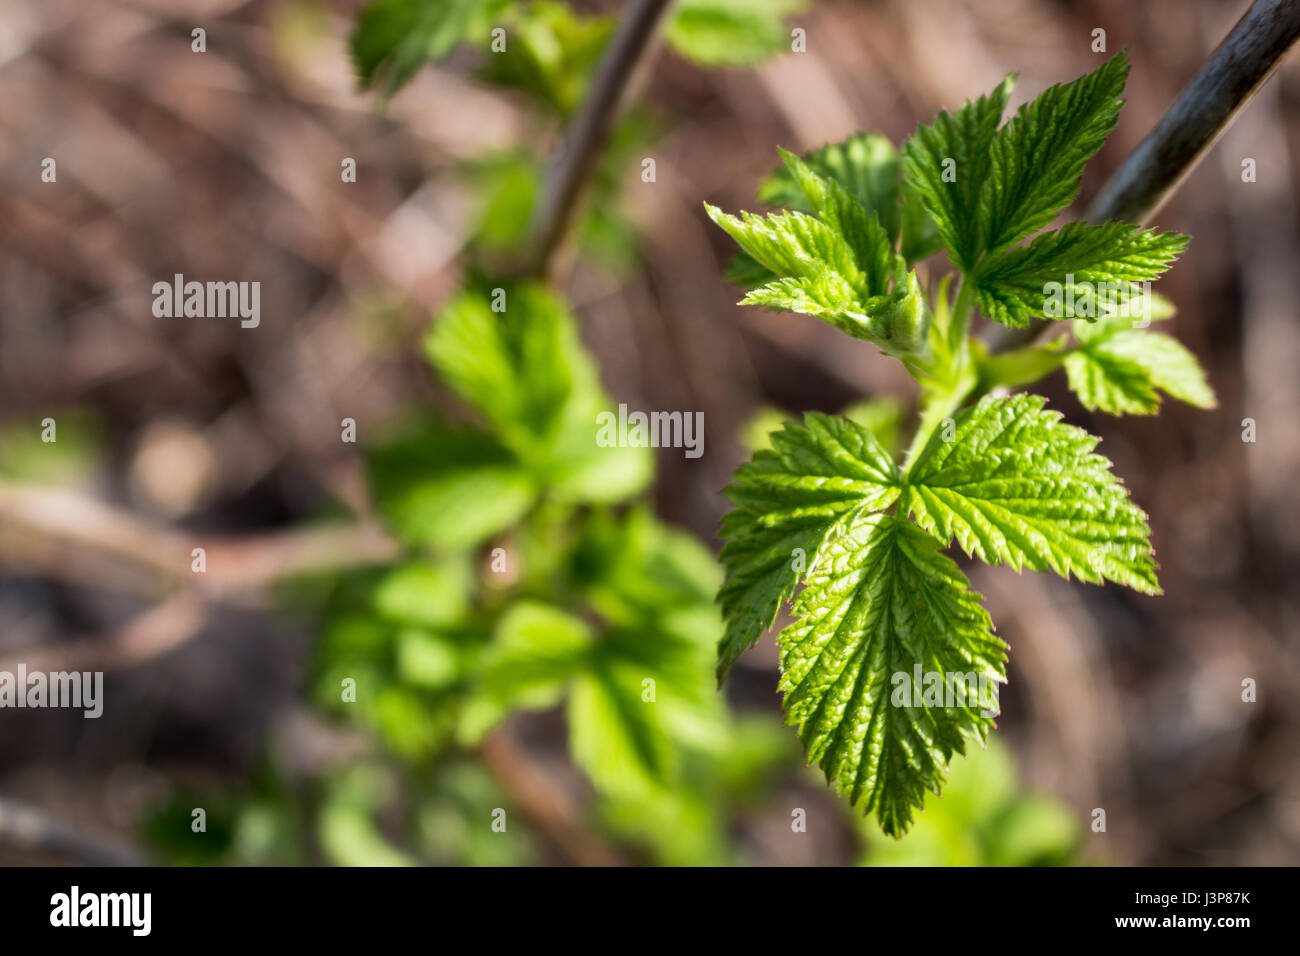 the burned leaves on the sun, leaves in yellow spots, the damaged leaves, the changed leaves, a crimson branch, a raspberry bush, a green bush. Stock Photo